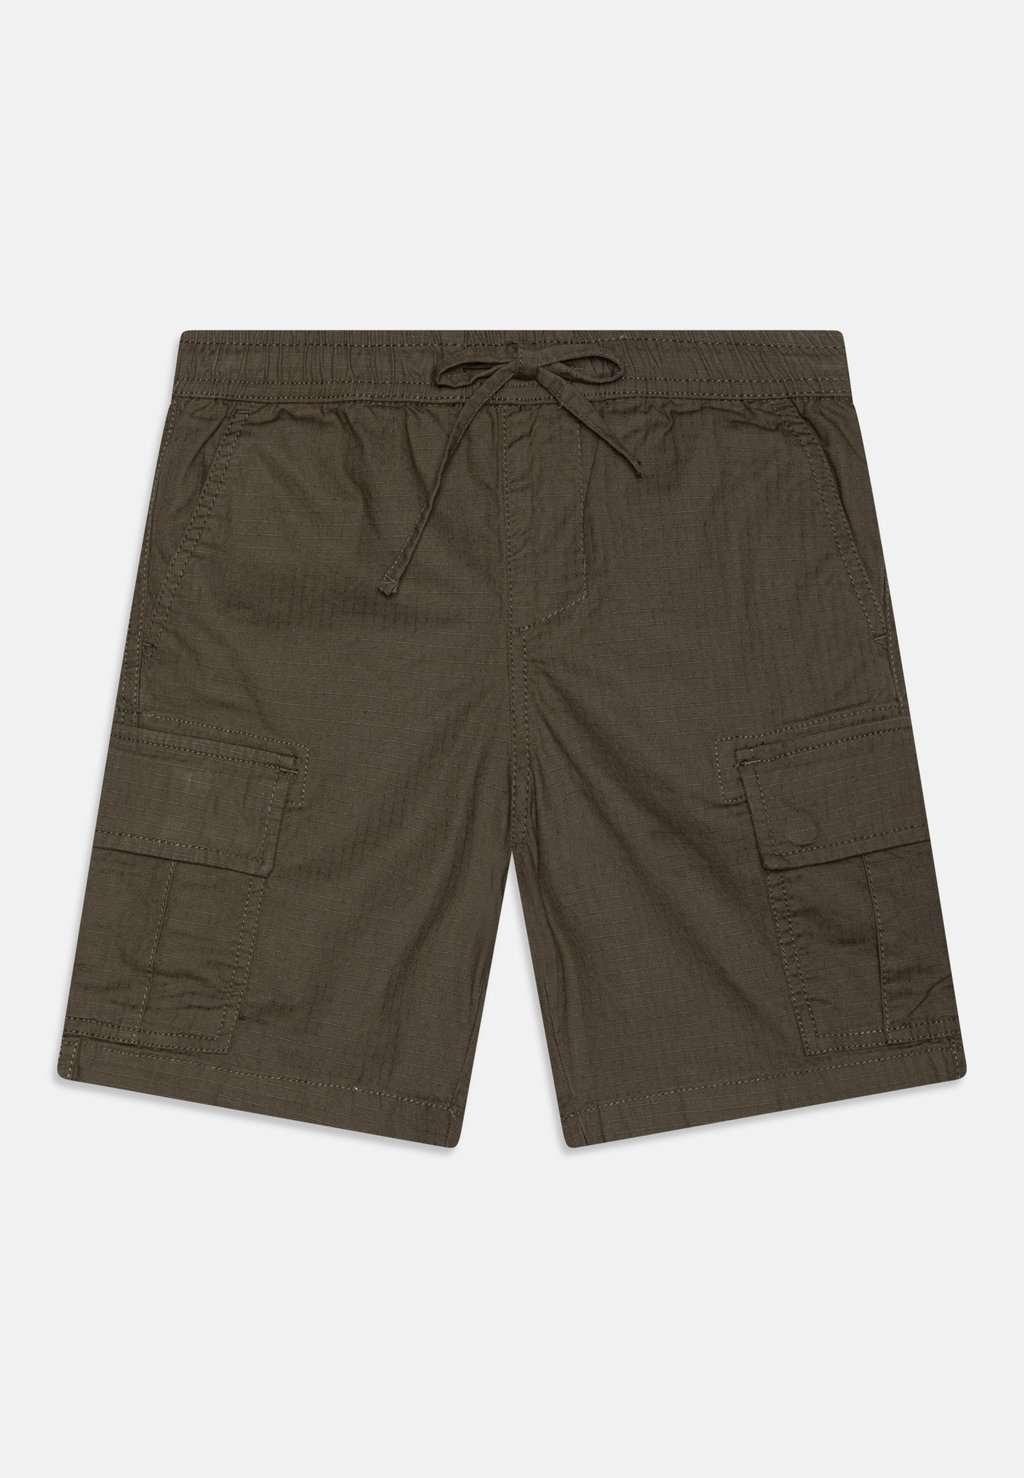 Брюки карго TAXER YOUTH Quiksilver, цвет olive